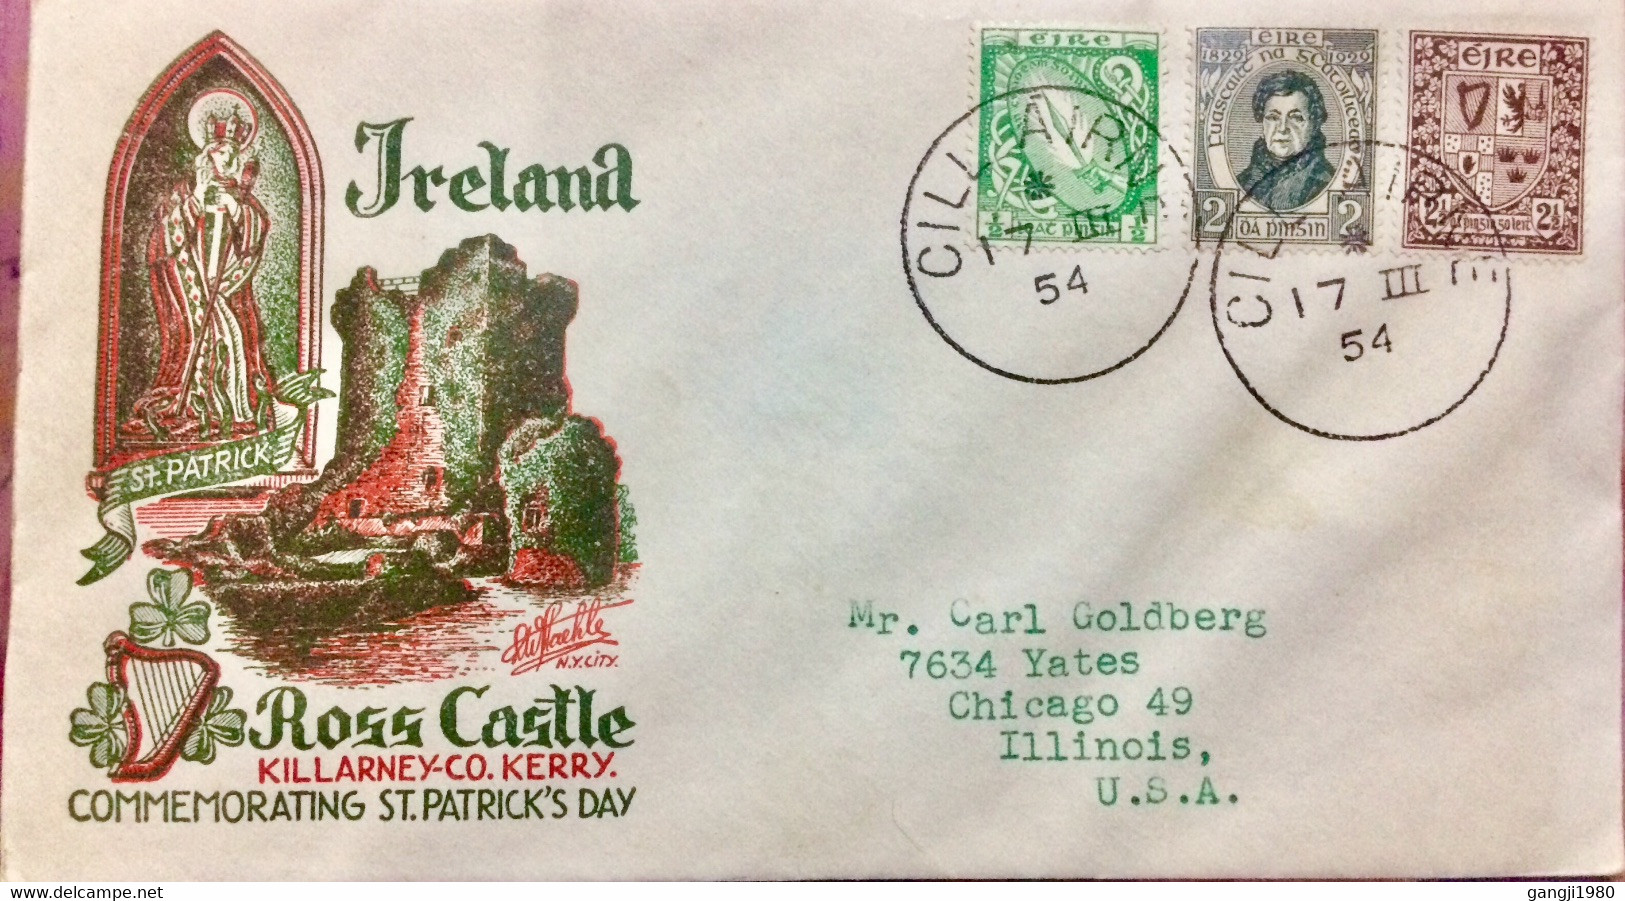 IRELAND 1954, ILLUSTRATED COVER, ROSS CASTLE, ST.PATRIC’S DAY, CILL AIRNE TOWN CANCEL,1922 SWORD OF LIGHT, ARM,1929 DANI - Covers & Documents